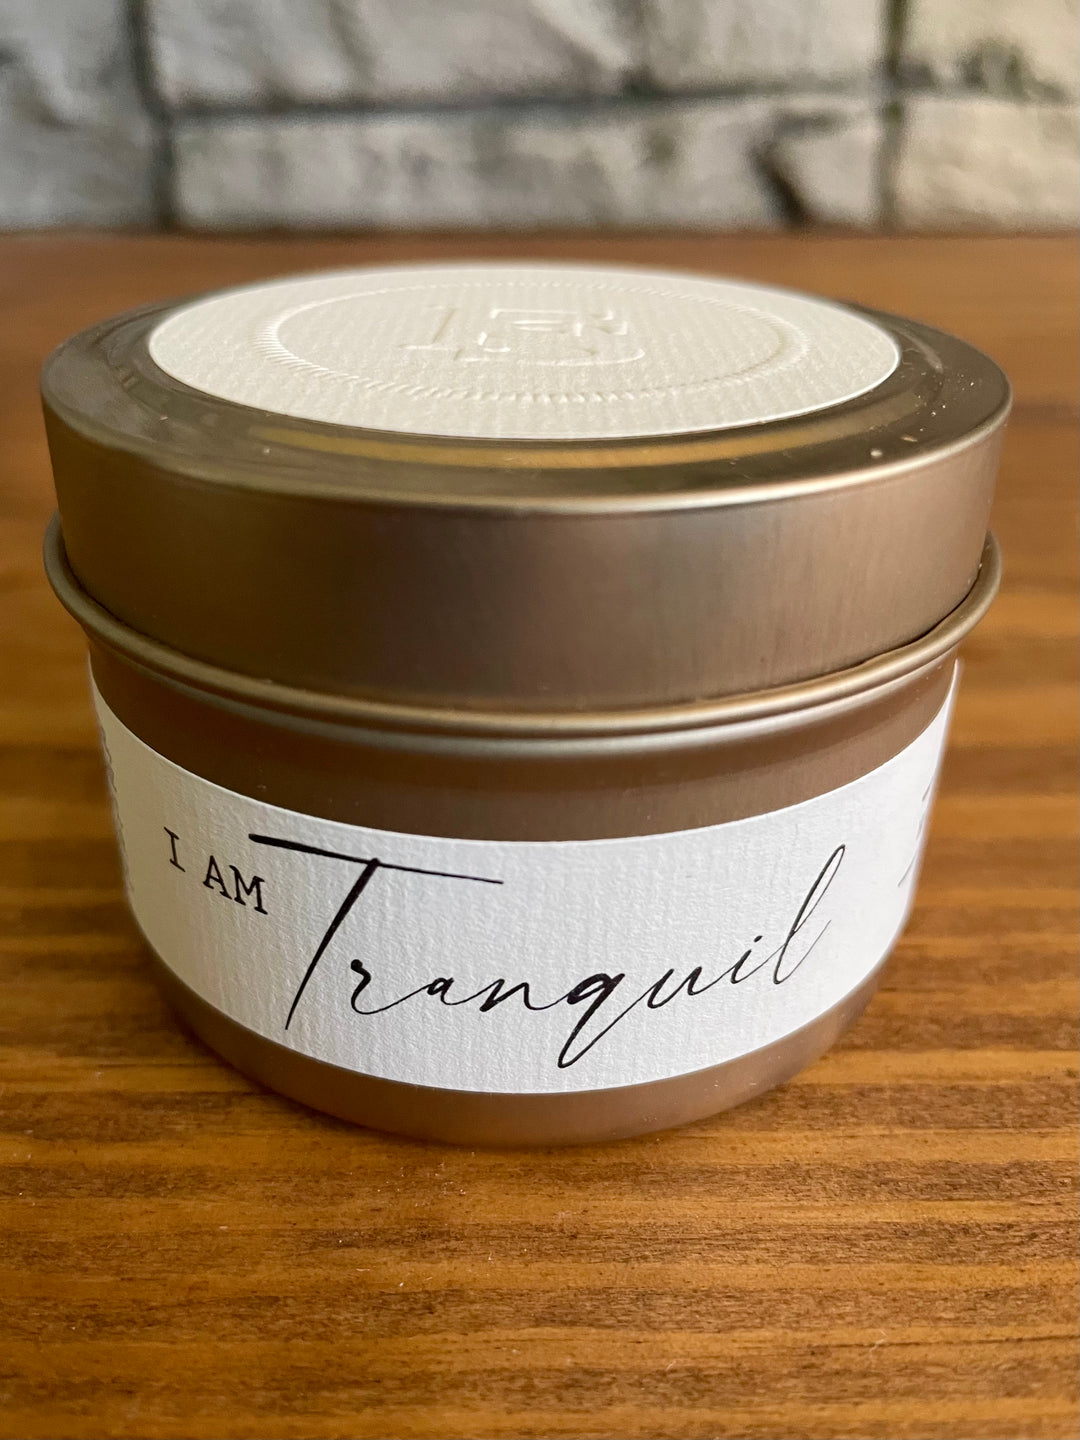 I am tranquil soy candle, fair trade